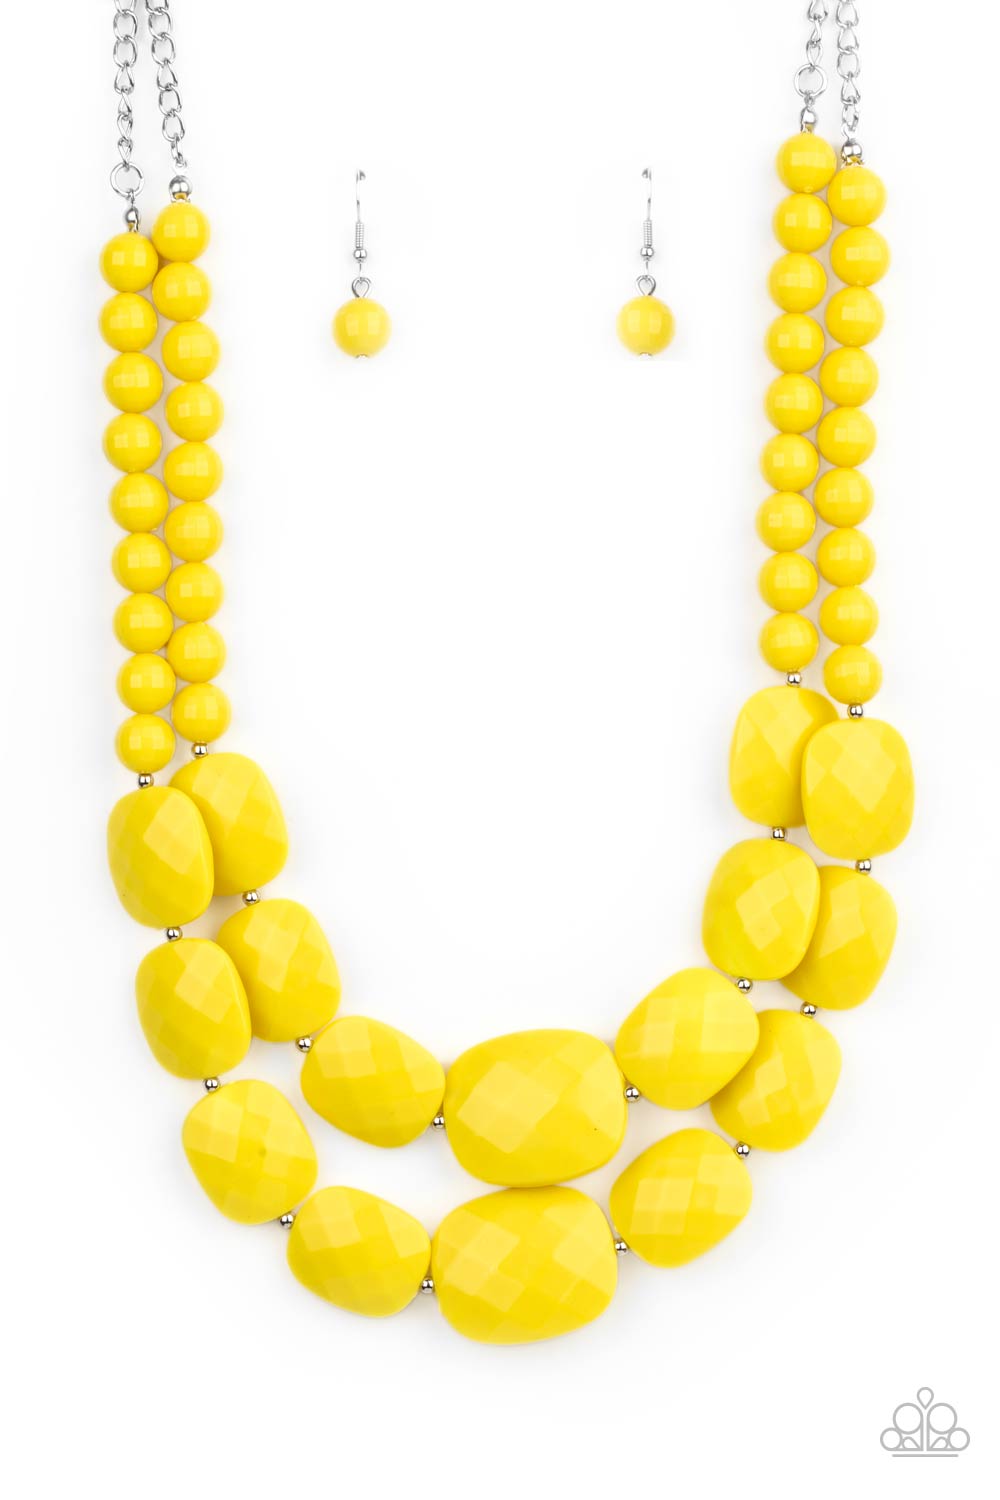 Resort Ready Yellow Necklace - Paparazzi Accessories  Featuring square facets, strands of shimmery Illuminating beads give way to an oversized collection of flattened Illuminating beads. Featuring faceted surfaces, the asymmetrical beads catch and reflect the light as they flawlessly layer below the collar. Features an adjustable clasp closure.  All Paparazzi Accessories are lead free and nickel free!  Sold as one individual necklace. Includes one pair of matching earrings.